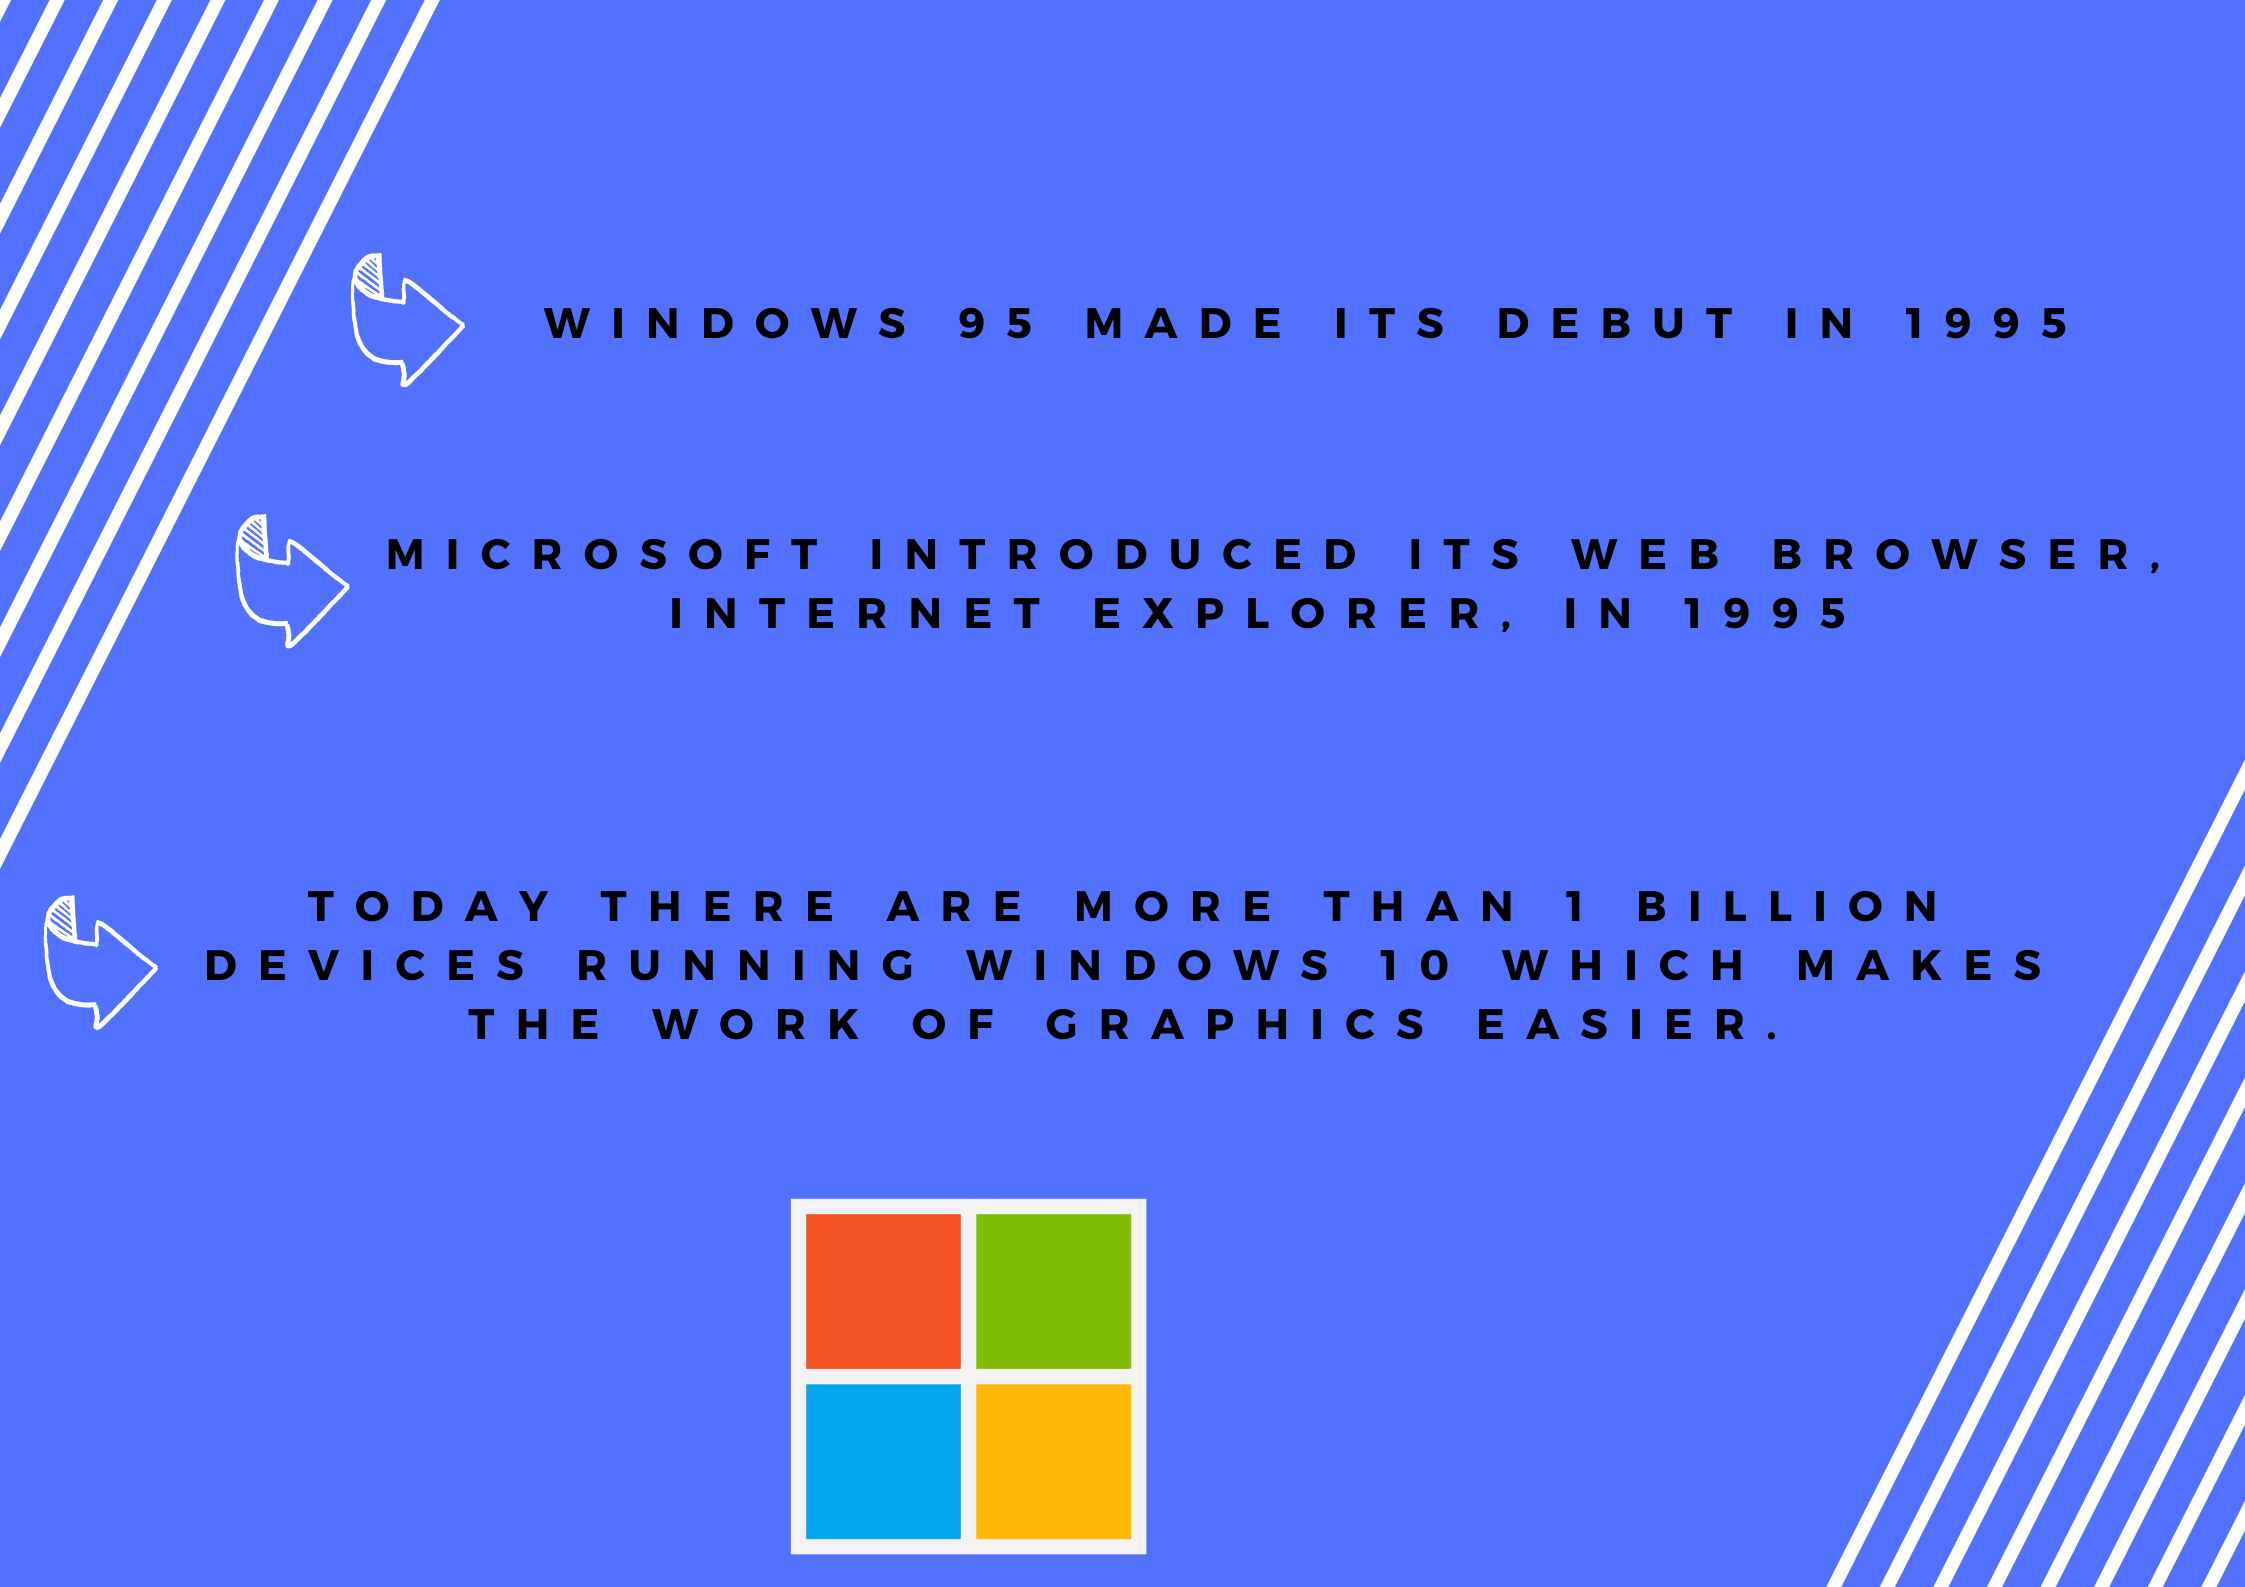 history of microsoft word ,who developed the first version of windows operating system